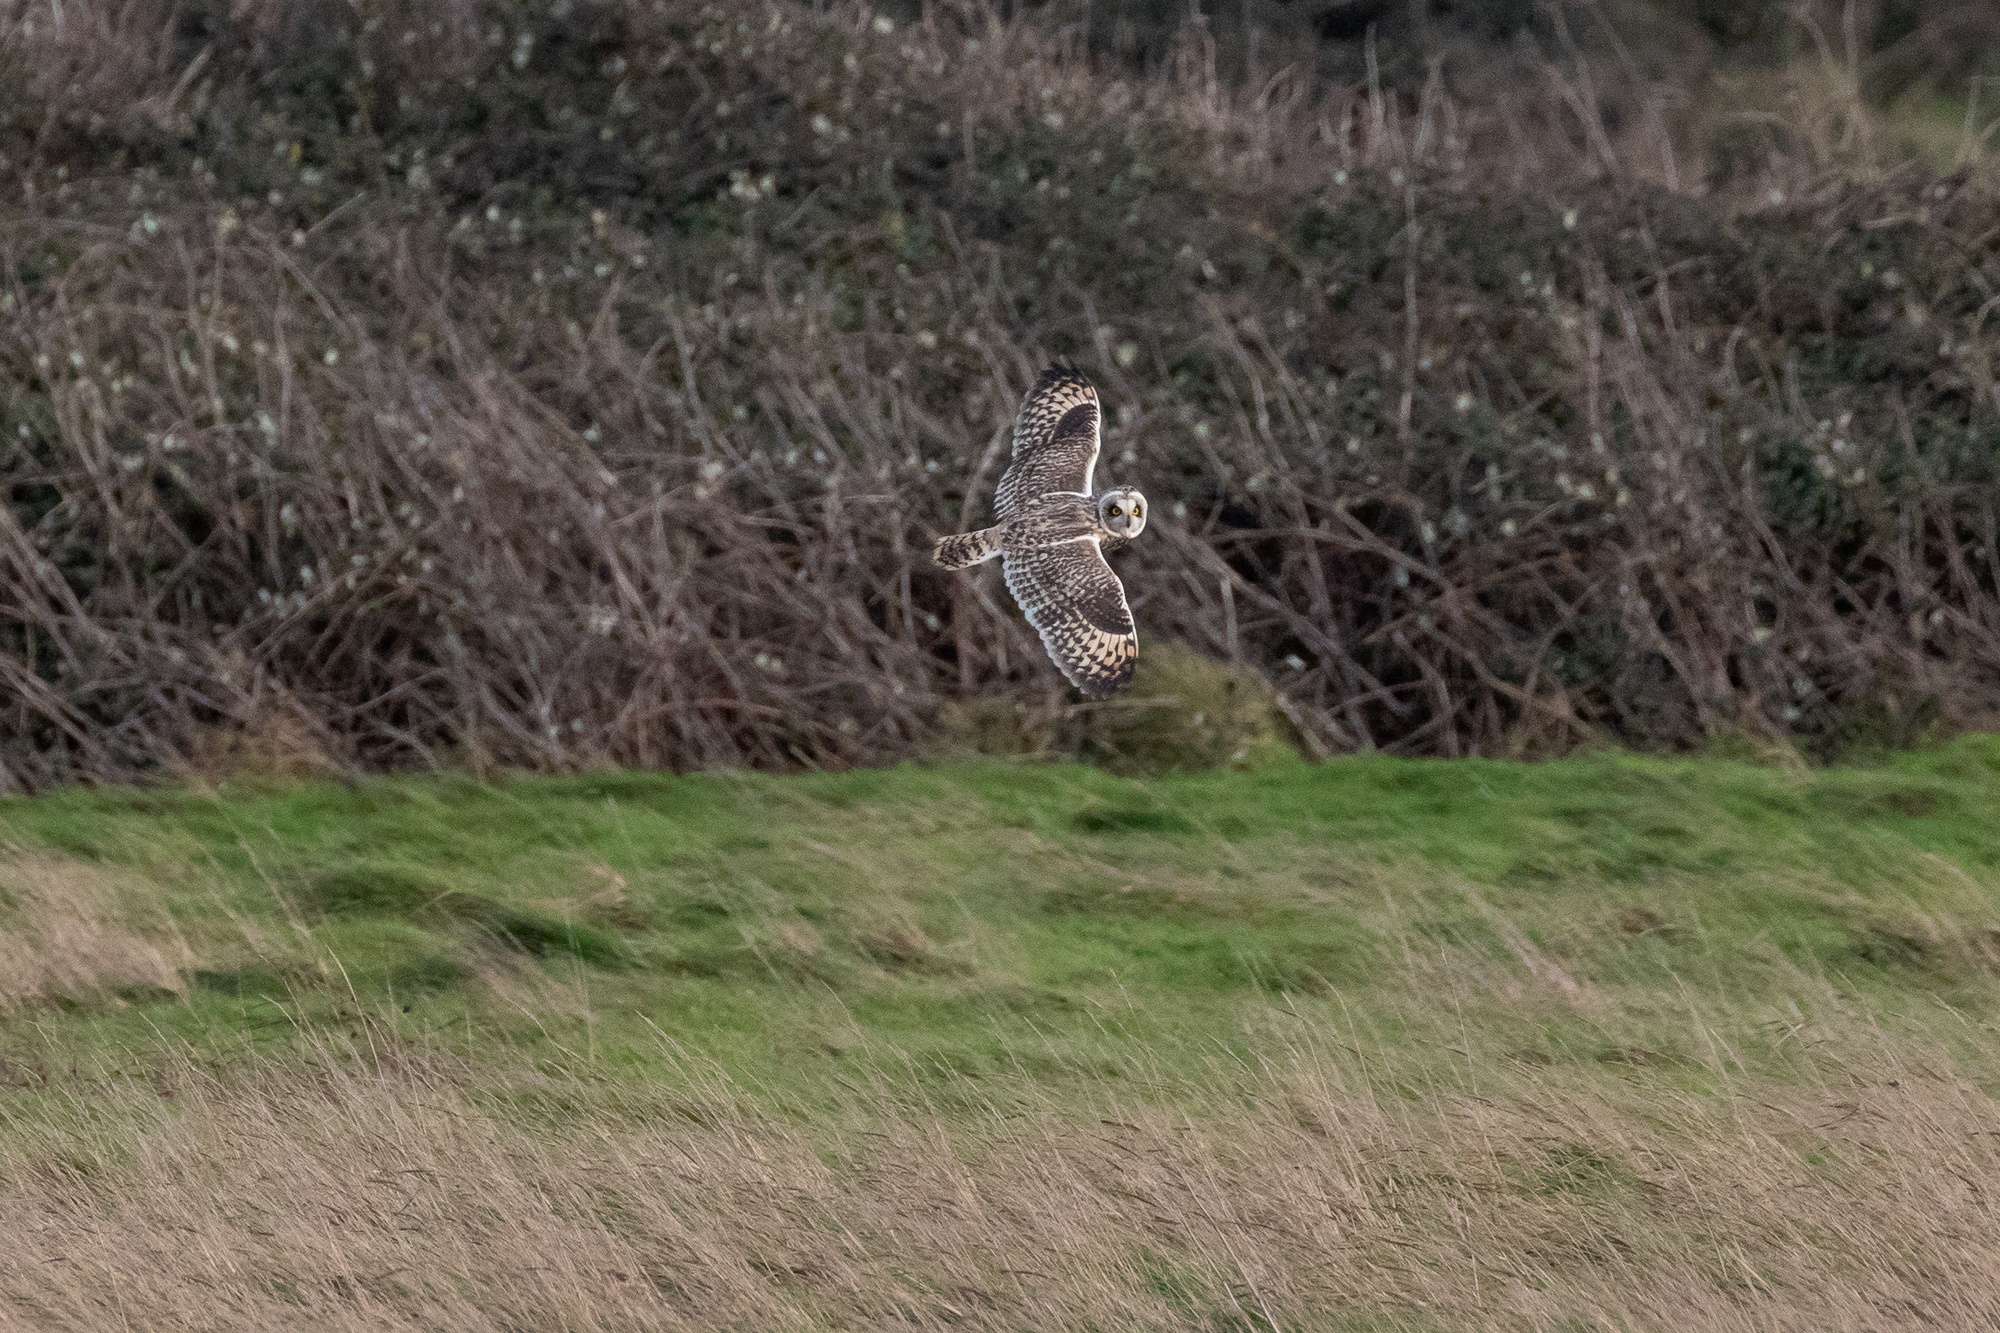 Short-eared owl flying right low across grass looking towards camera